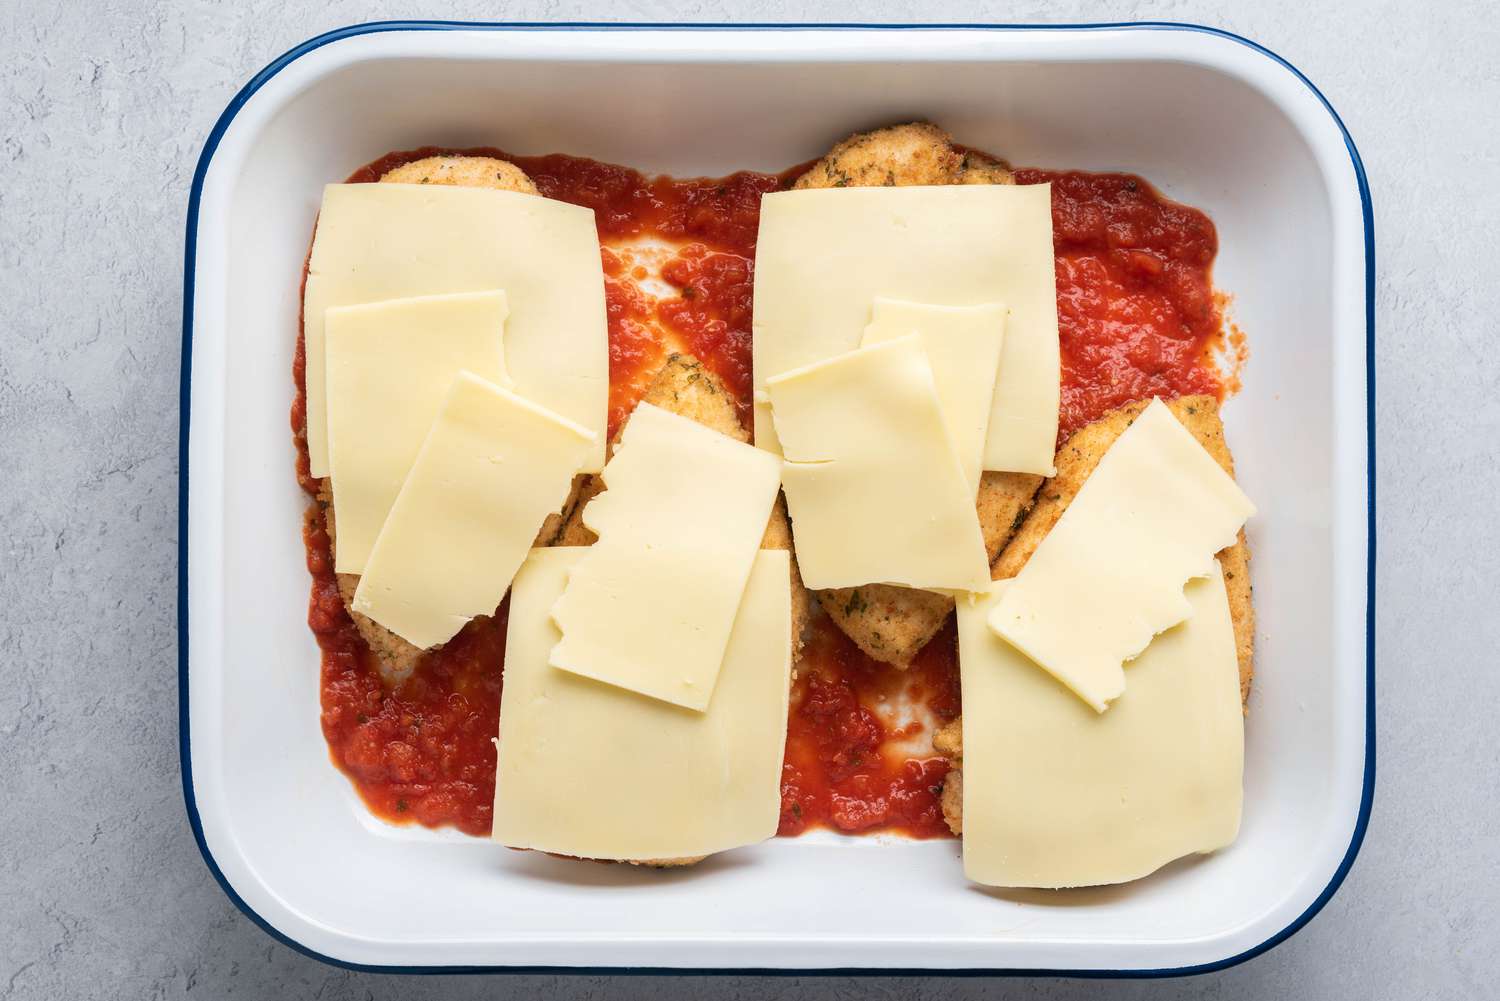 Tomato sauce, chicken and cheese in a greased casserole dish 